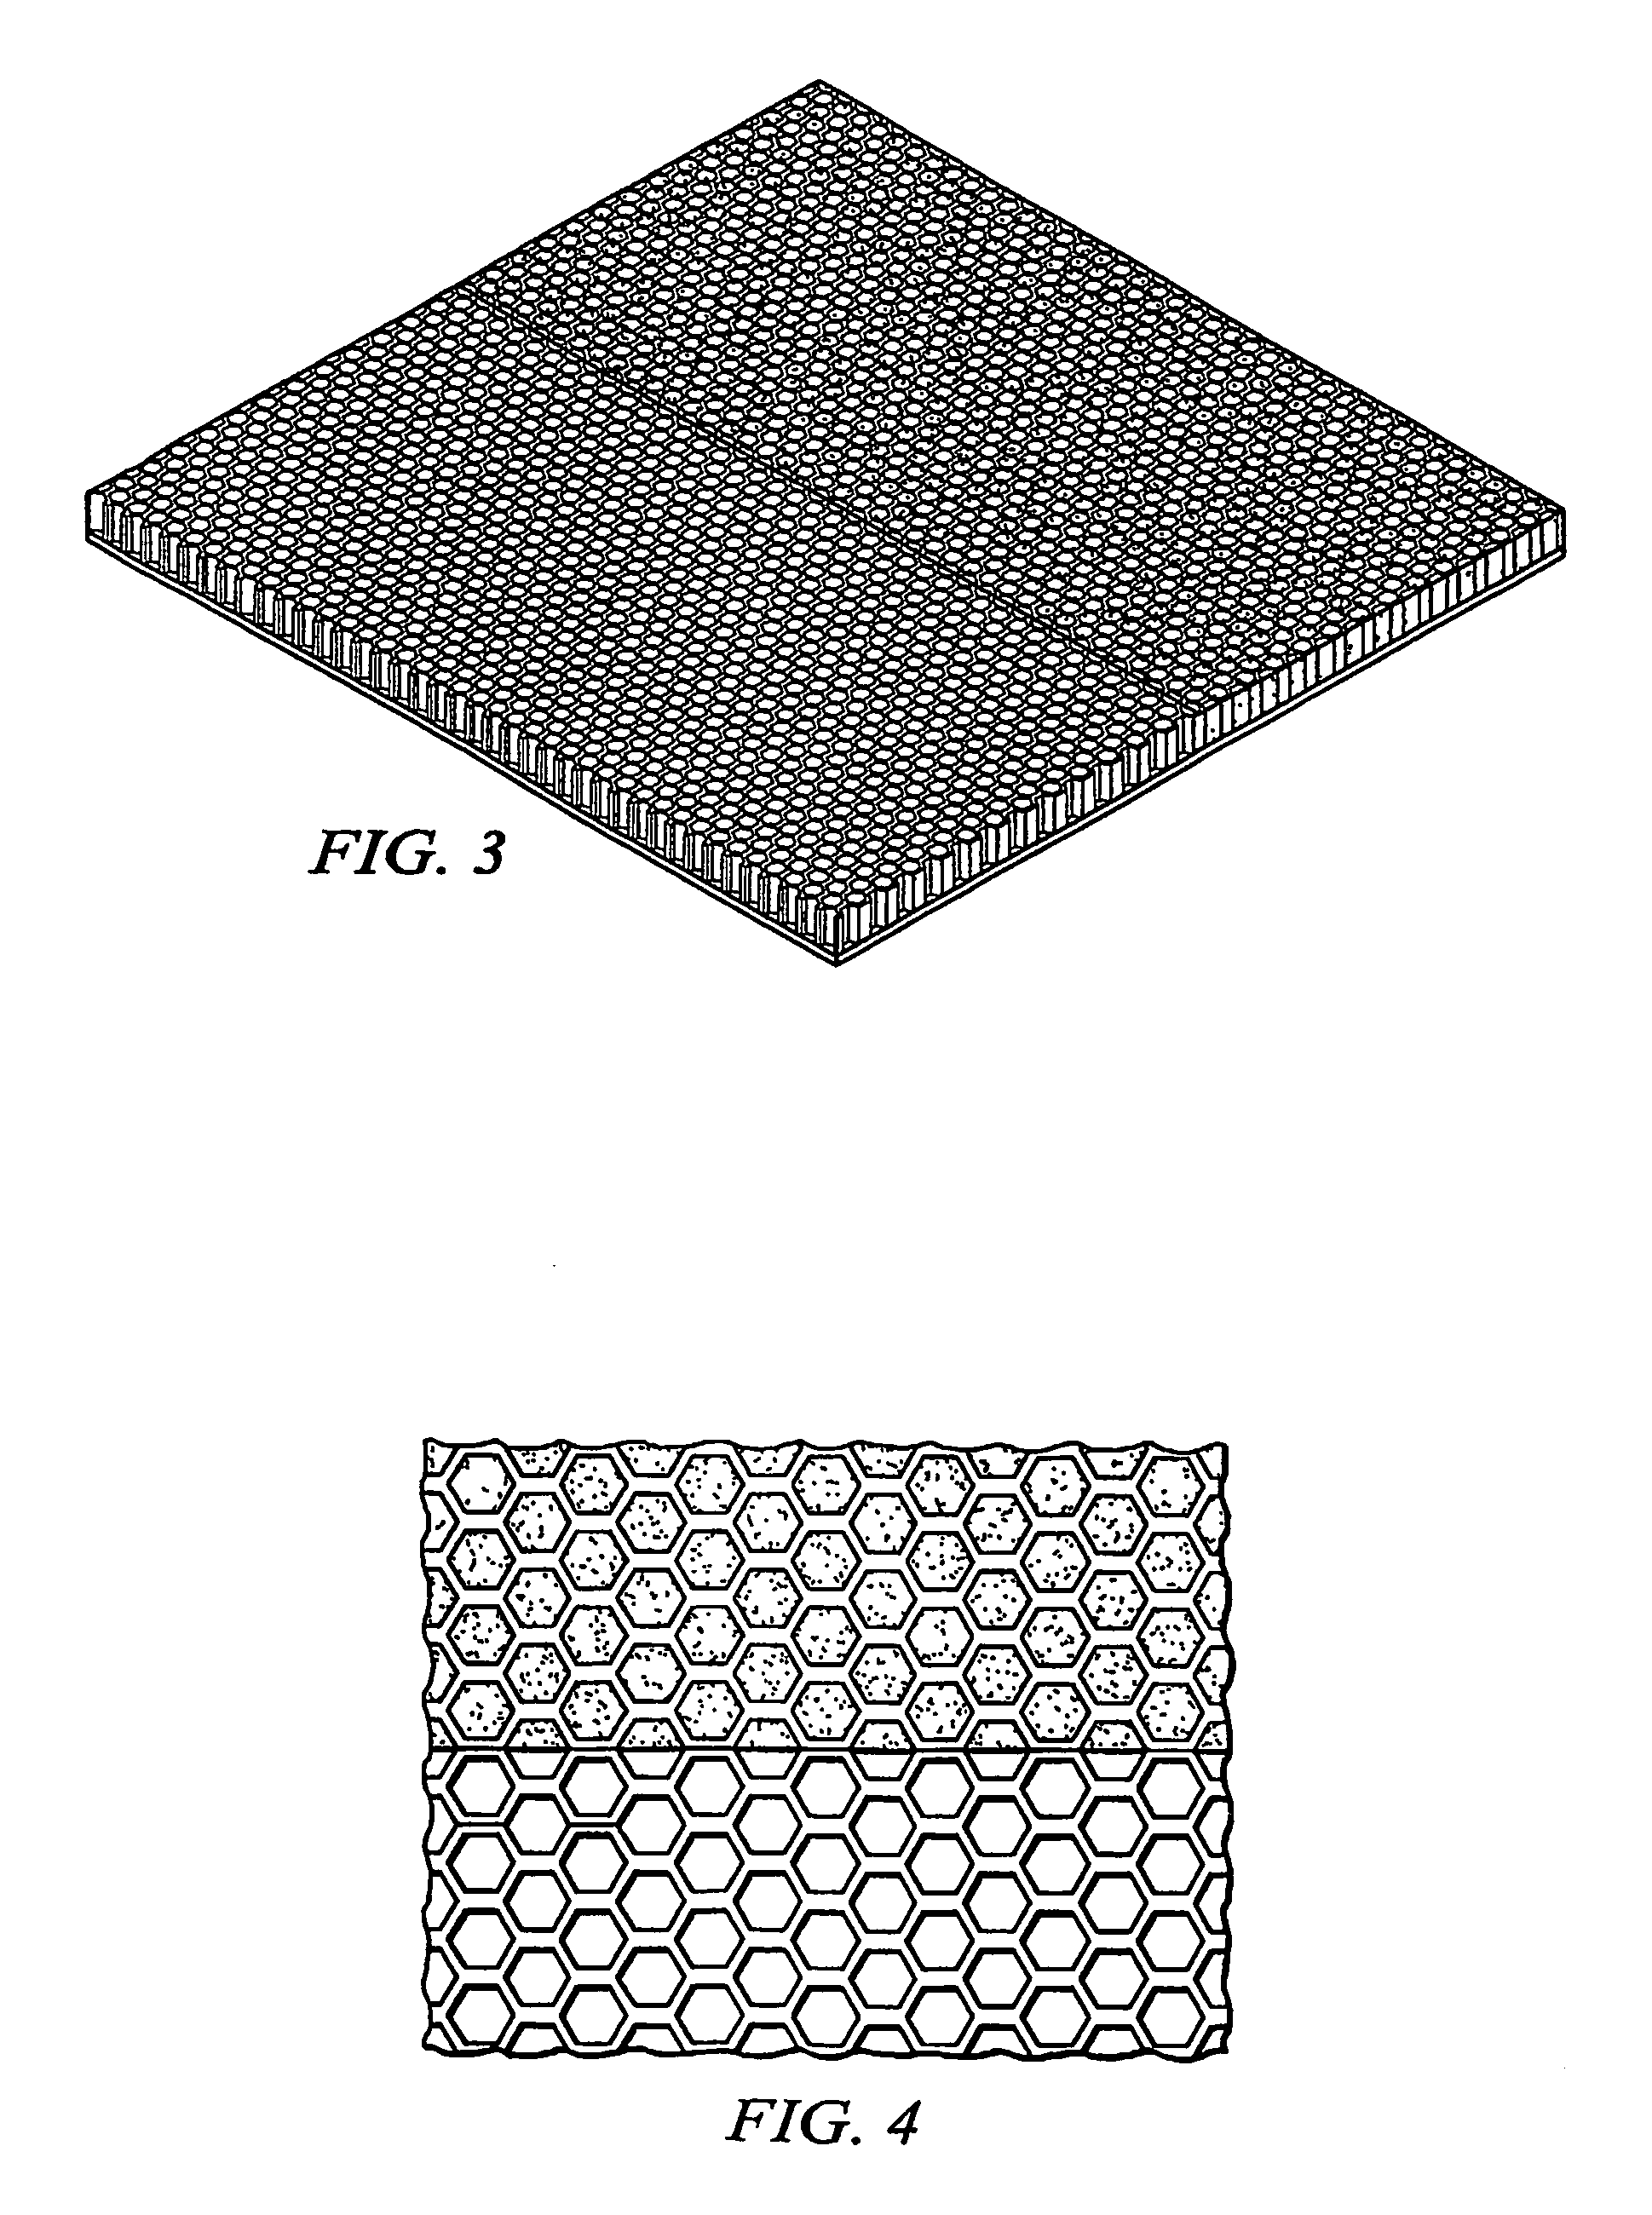 Method and apparatus for reducing the infrared and radar signature of a vehicle